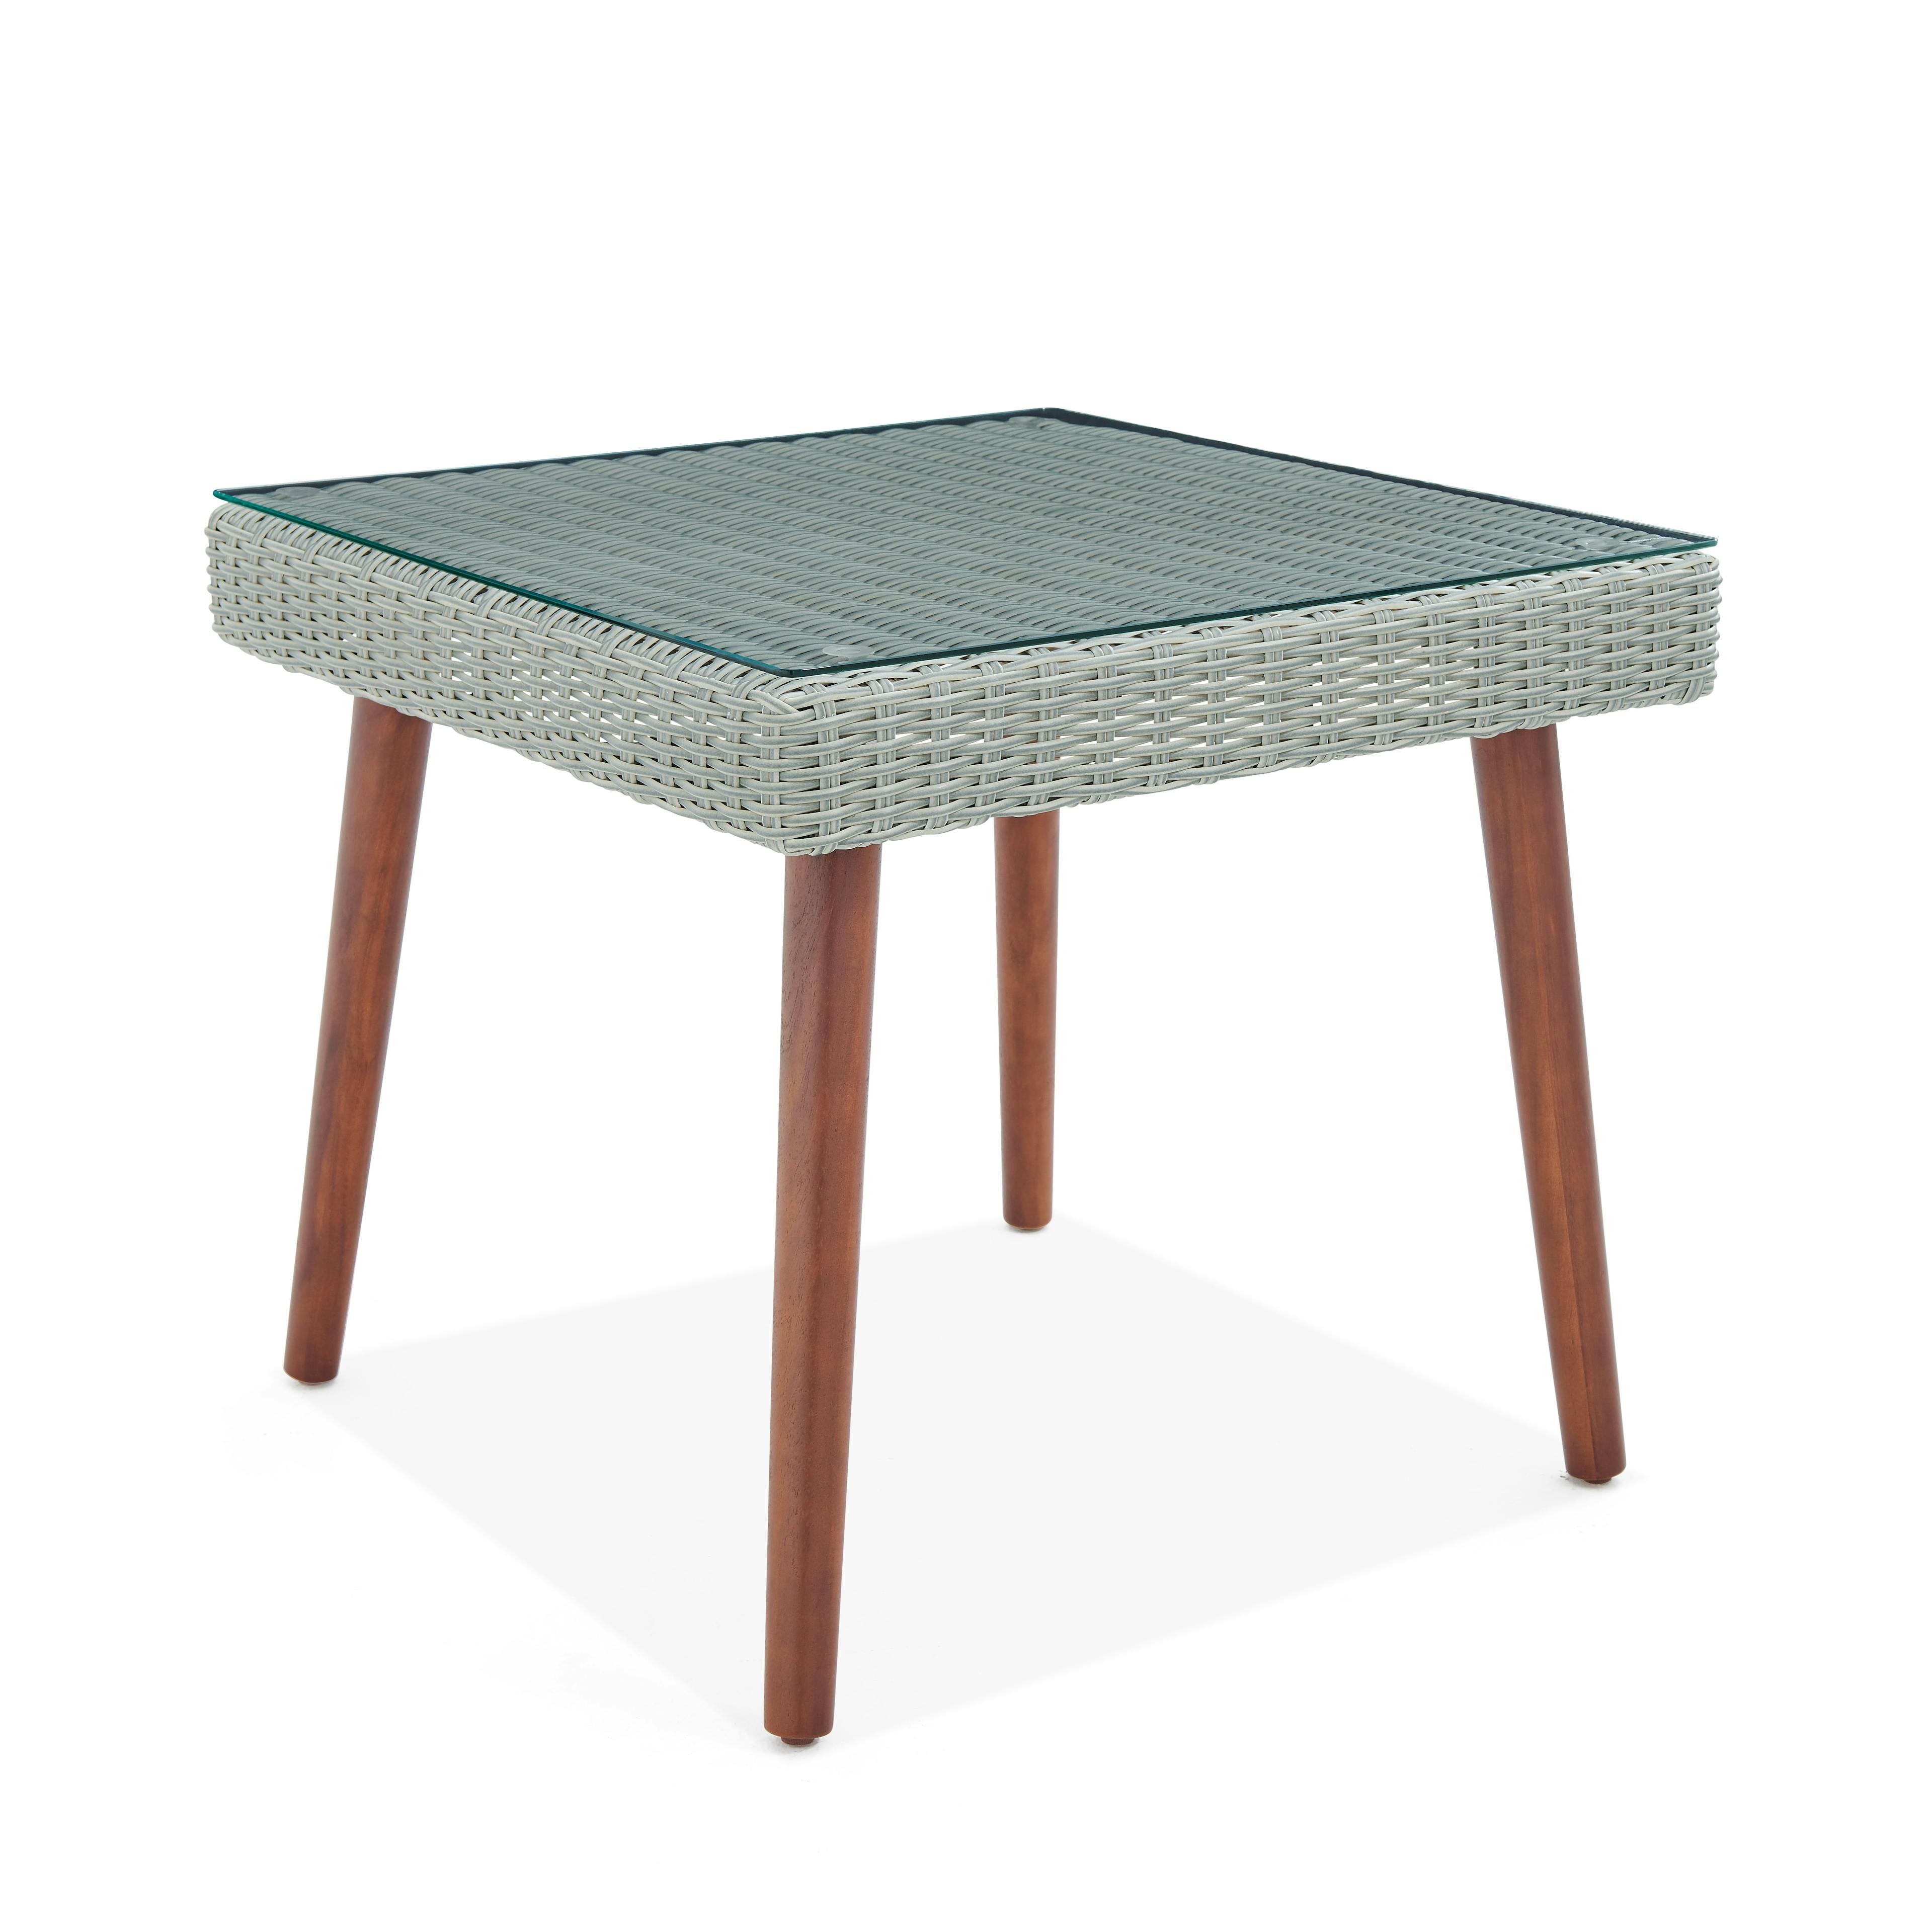 Albany Mid-Century Modern Light Gray Wicker Outdoor Cocktail Table with Glass Top